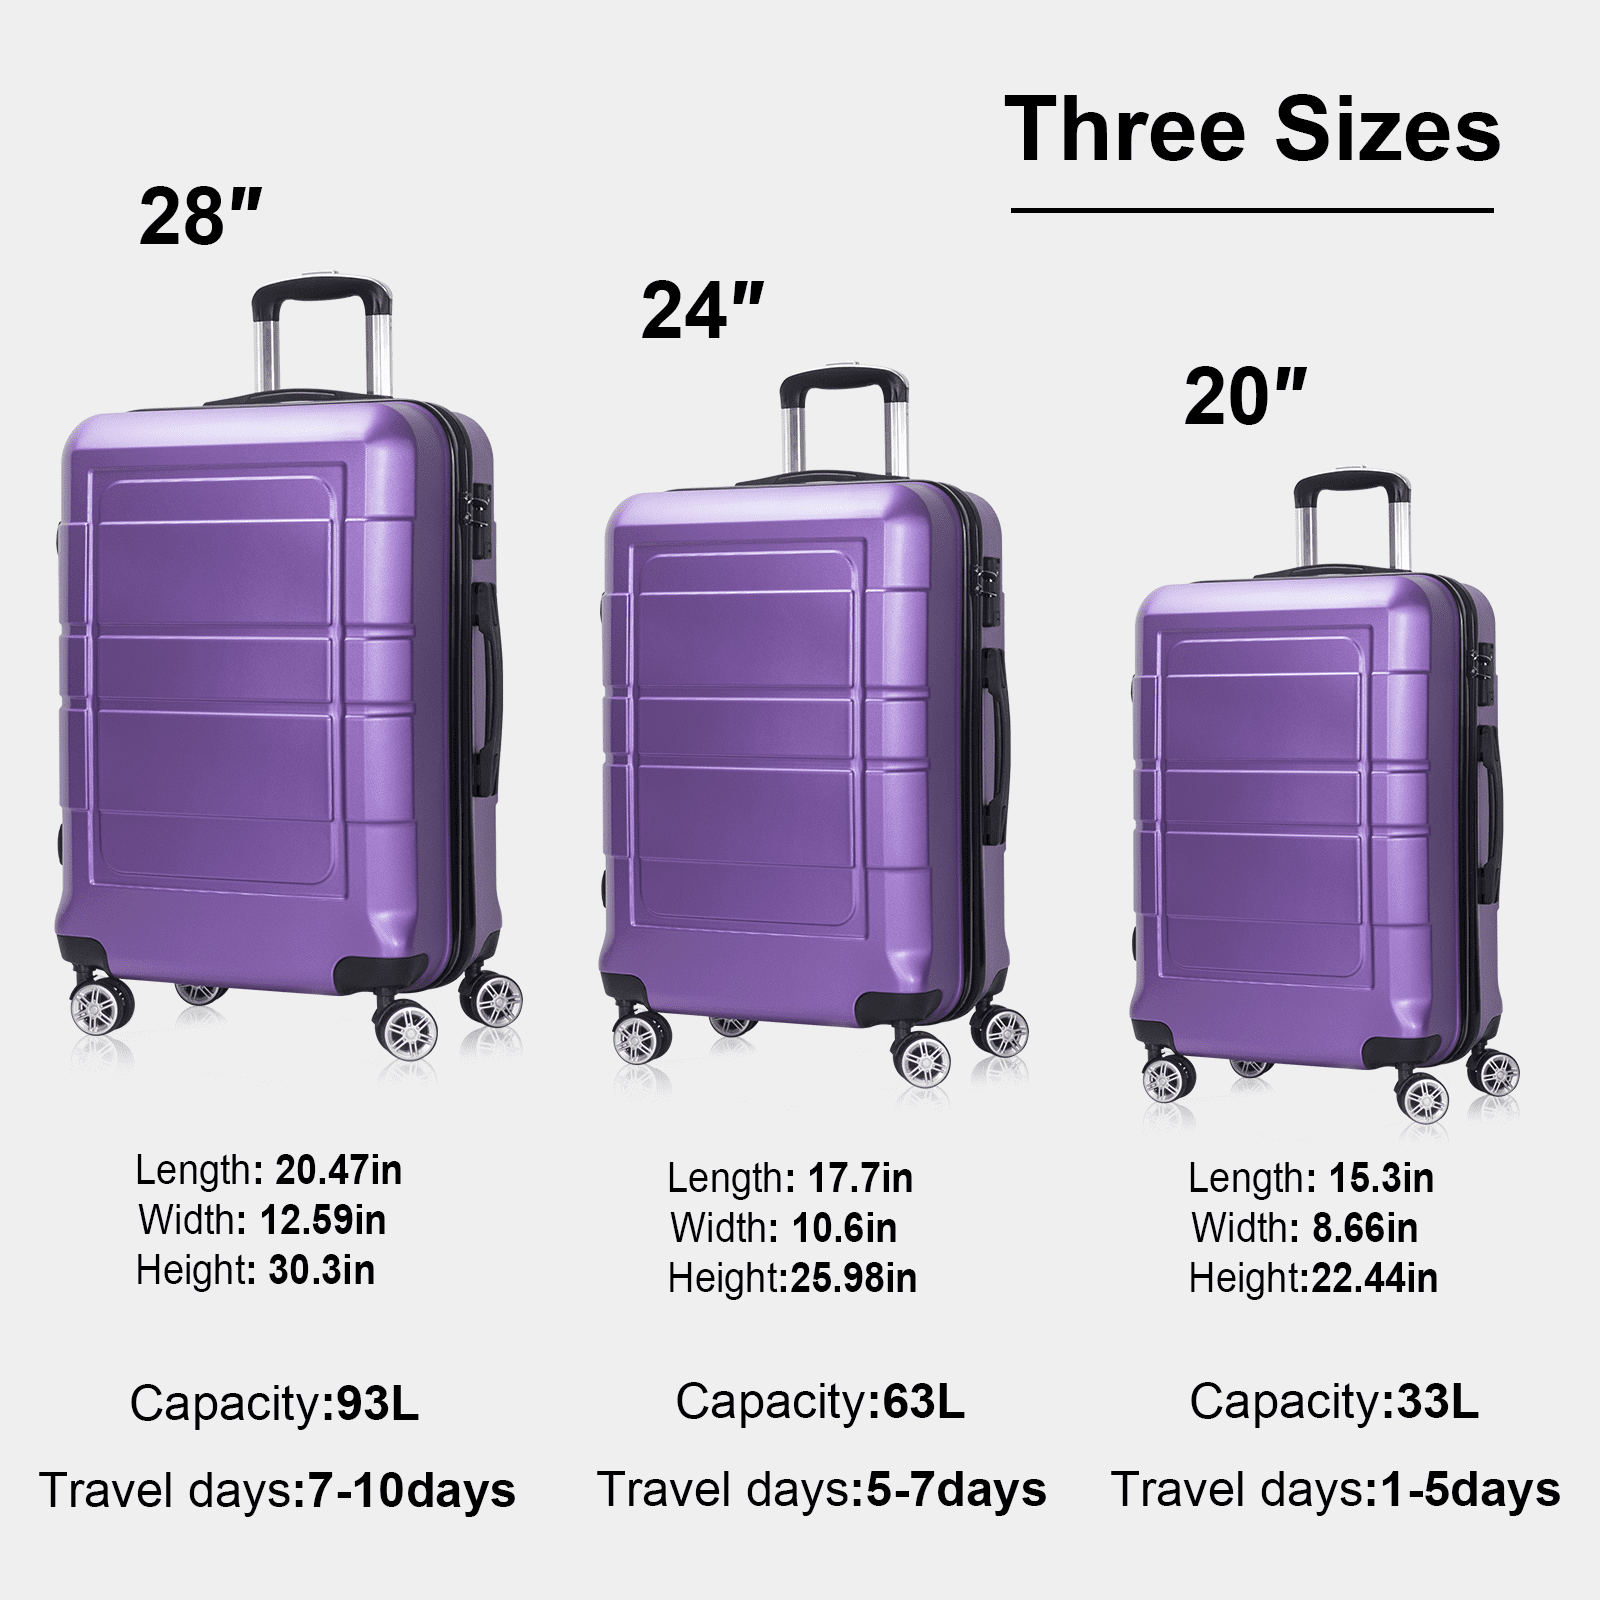 LUGGEX Purple Luggage Sets 3 Piece for Women - Expandable Carry on Luggage  Set w